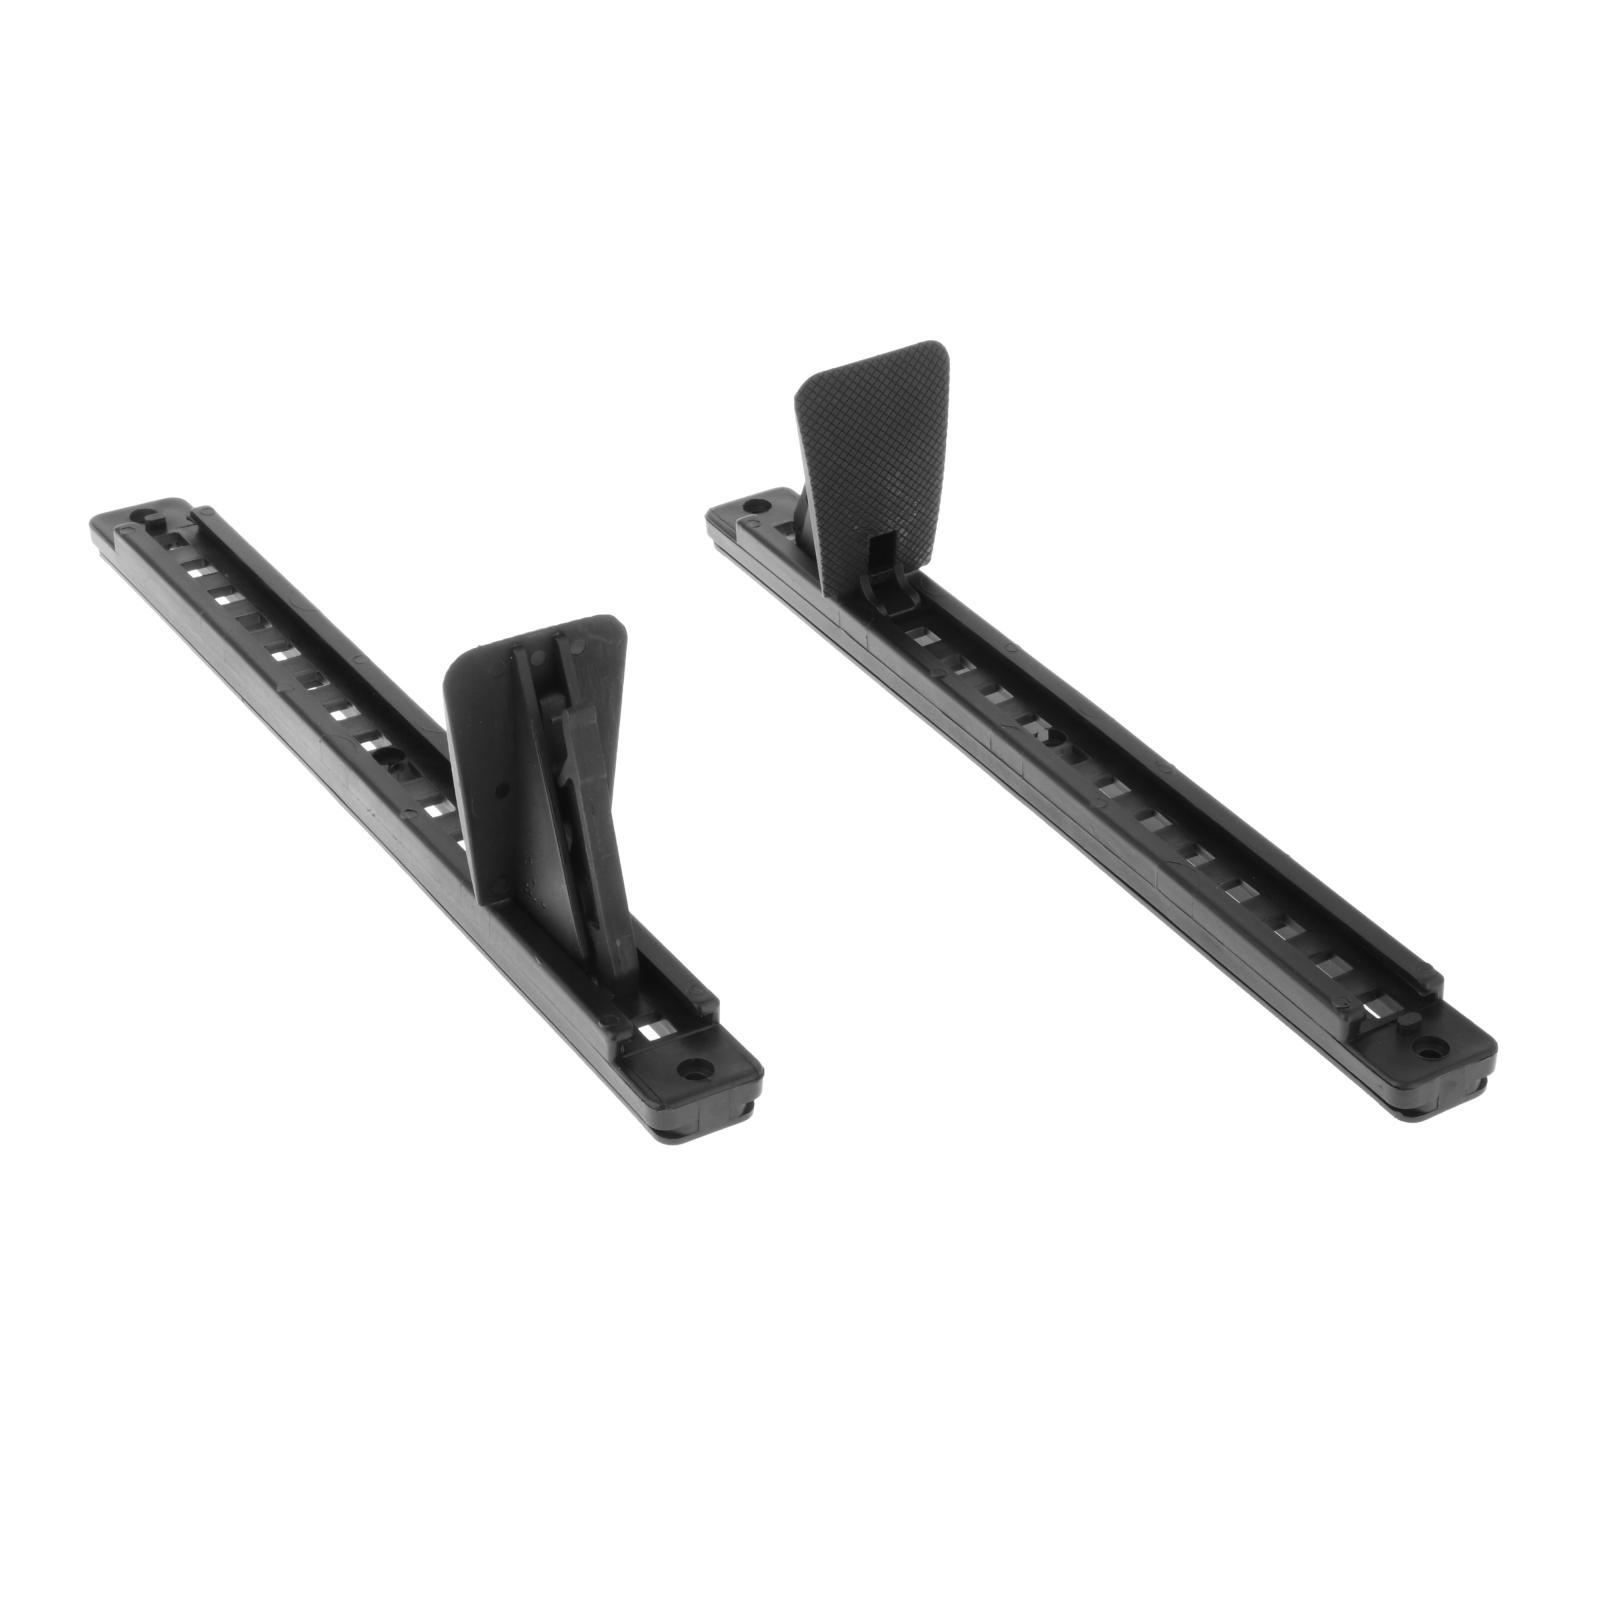 Kayak Foot Pegs with Lock Replacement Parts Black Finish 15 Inches Universal Set of 2 Foot Brace Foot Pedals Footrest